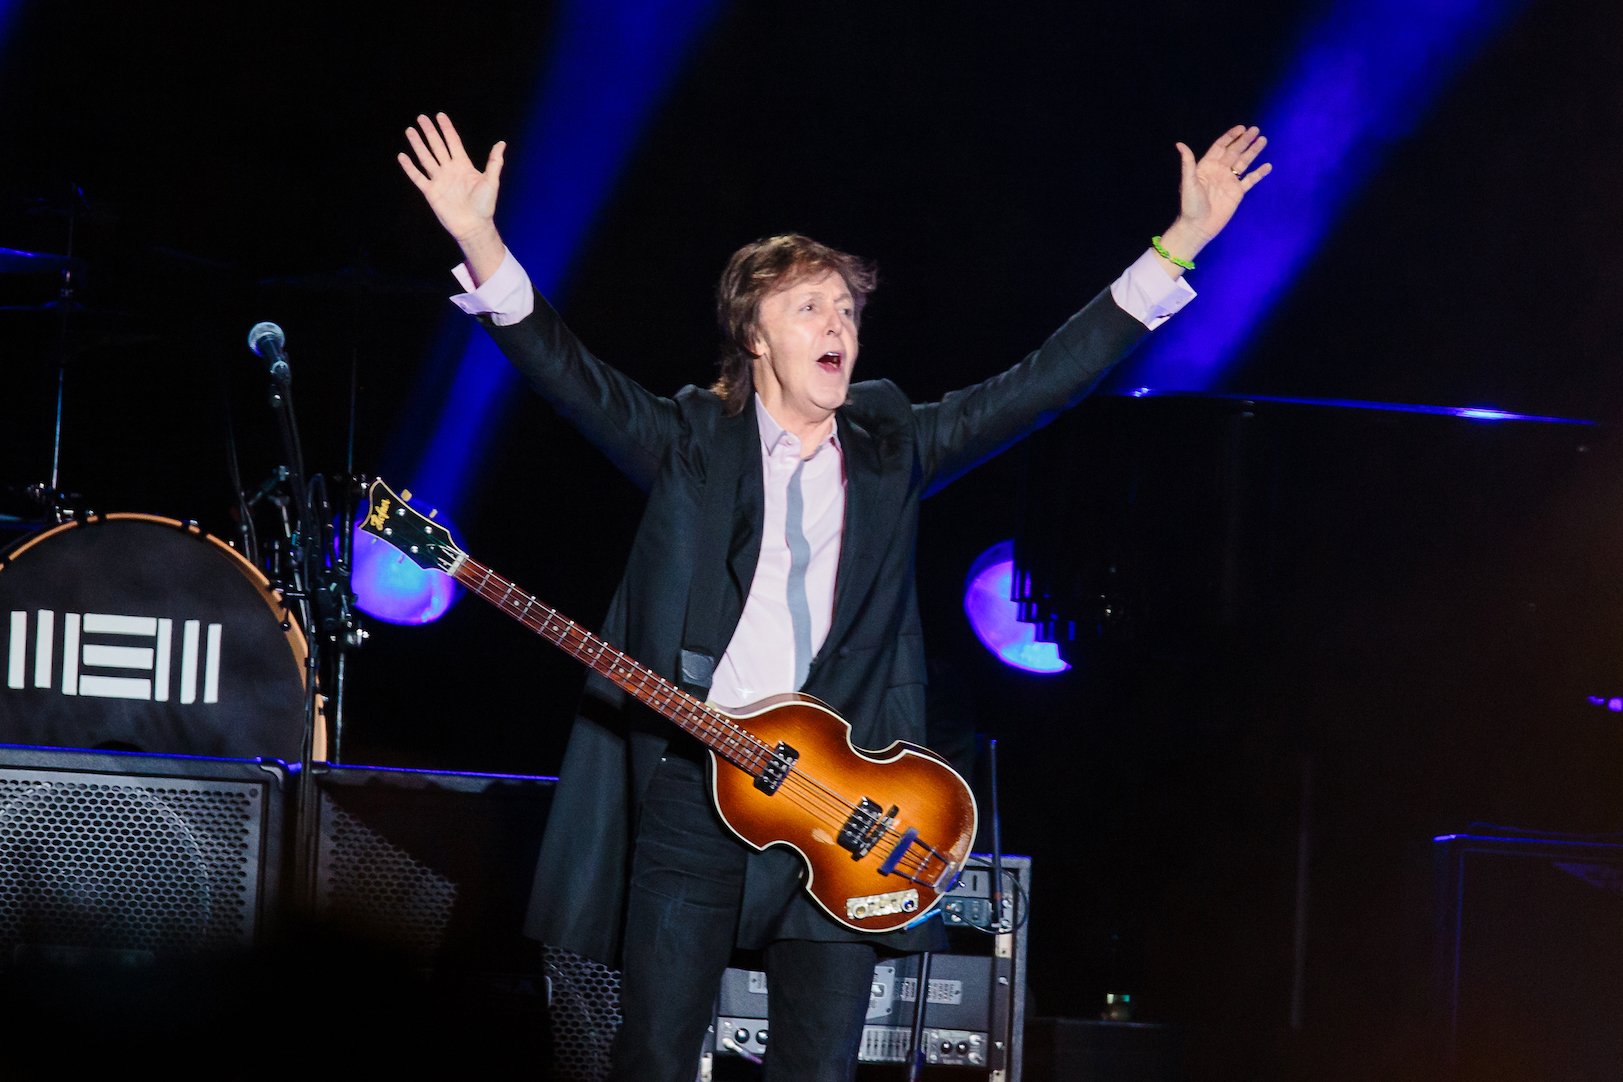 Paul McCartney performs on stage in Sao Paulo, Brazil